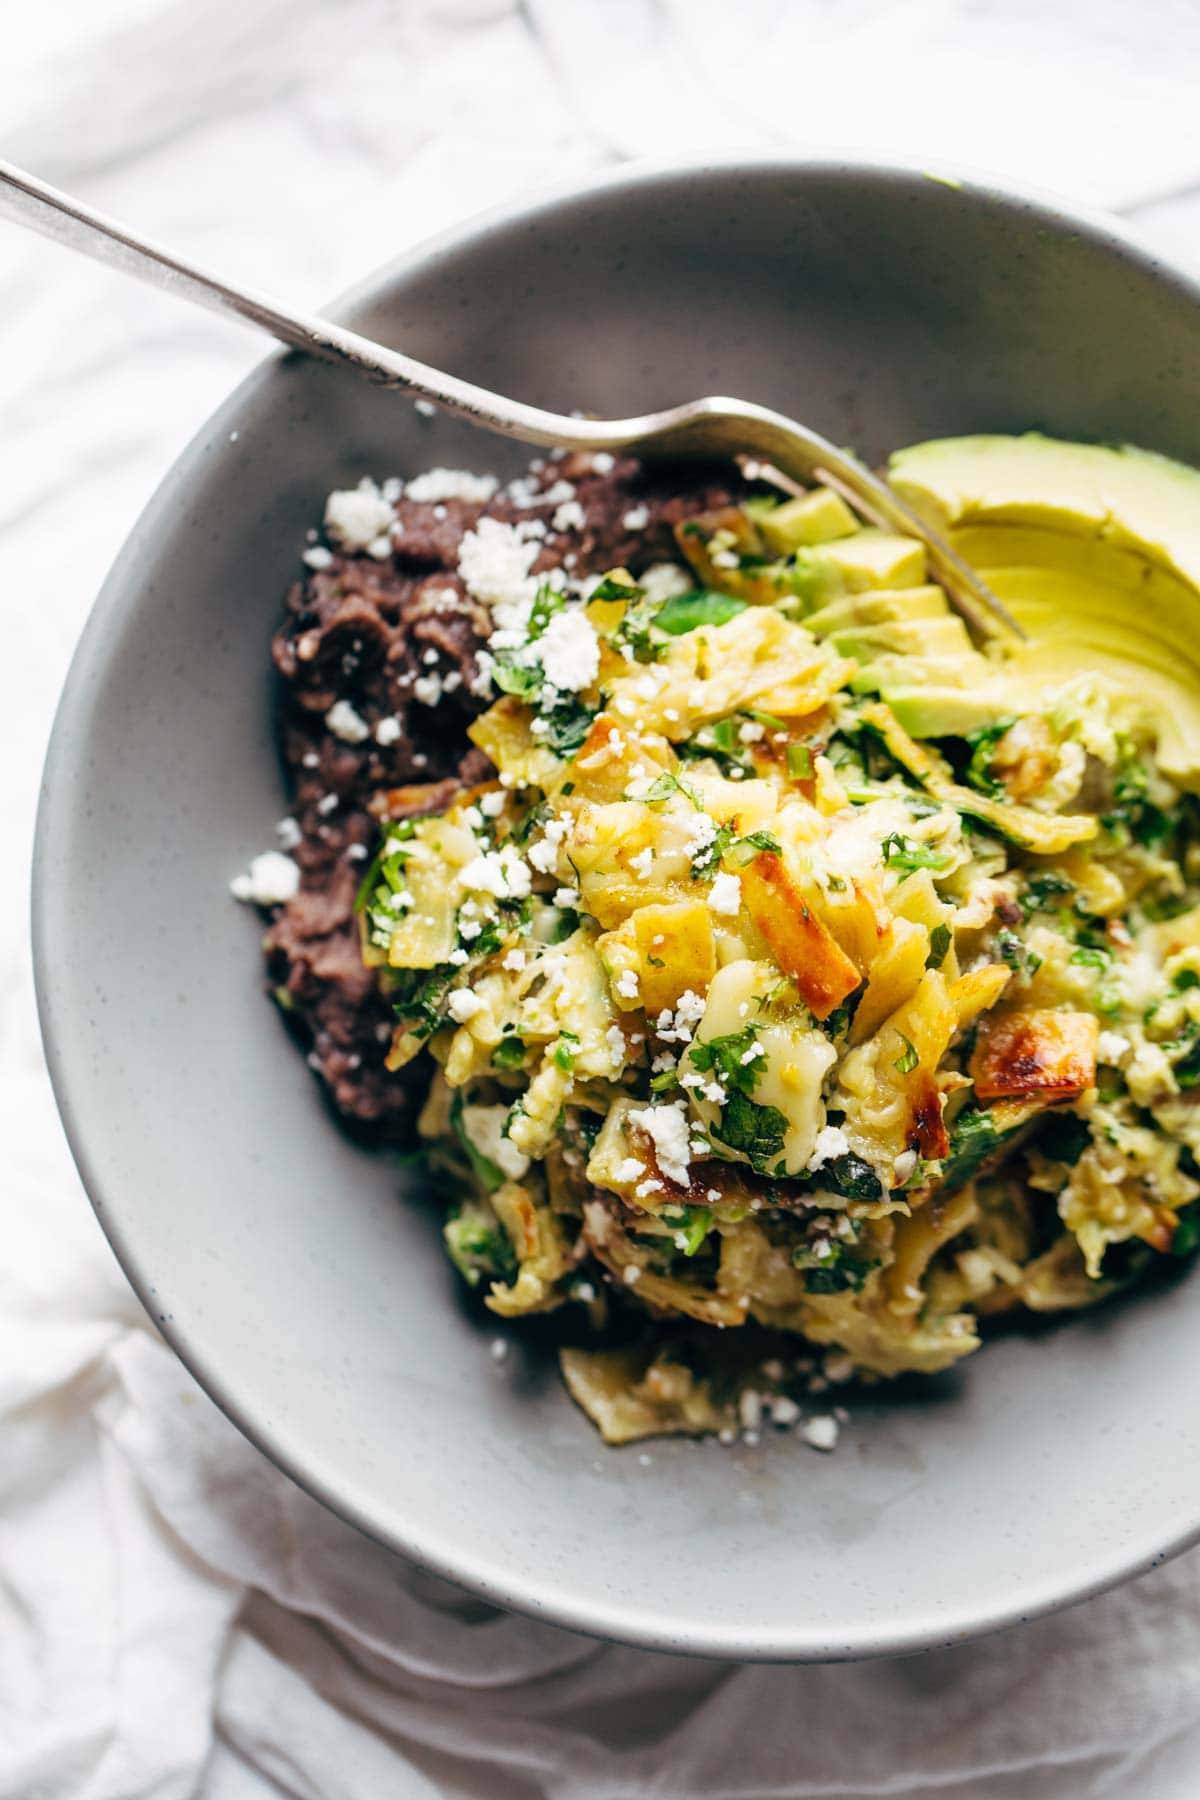 Migas in a bowl with a fork.